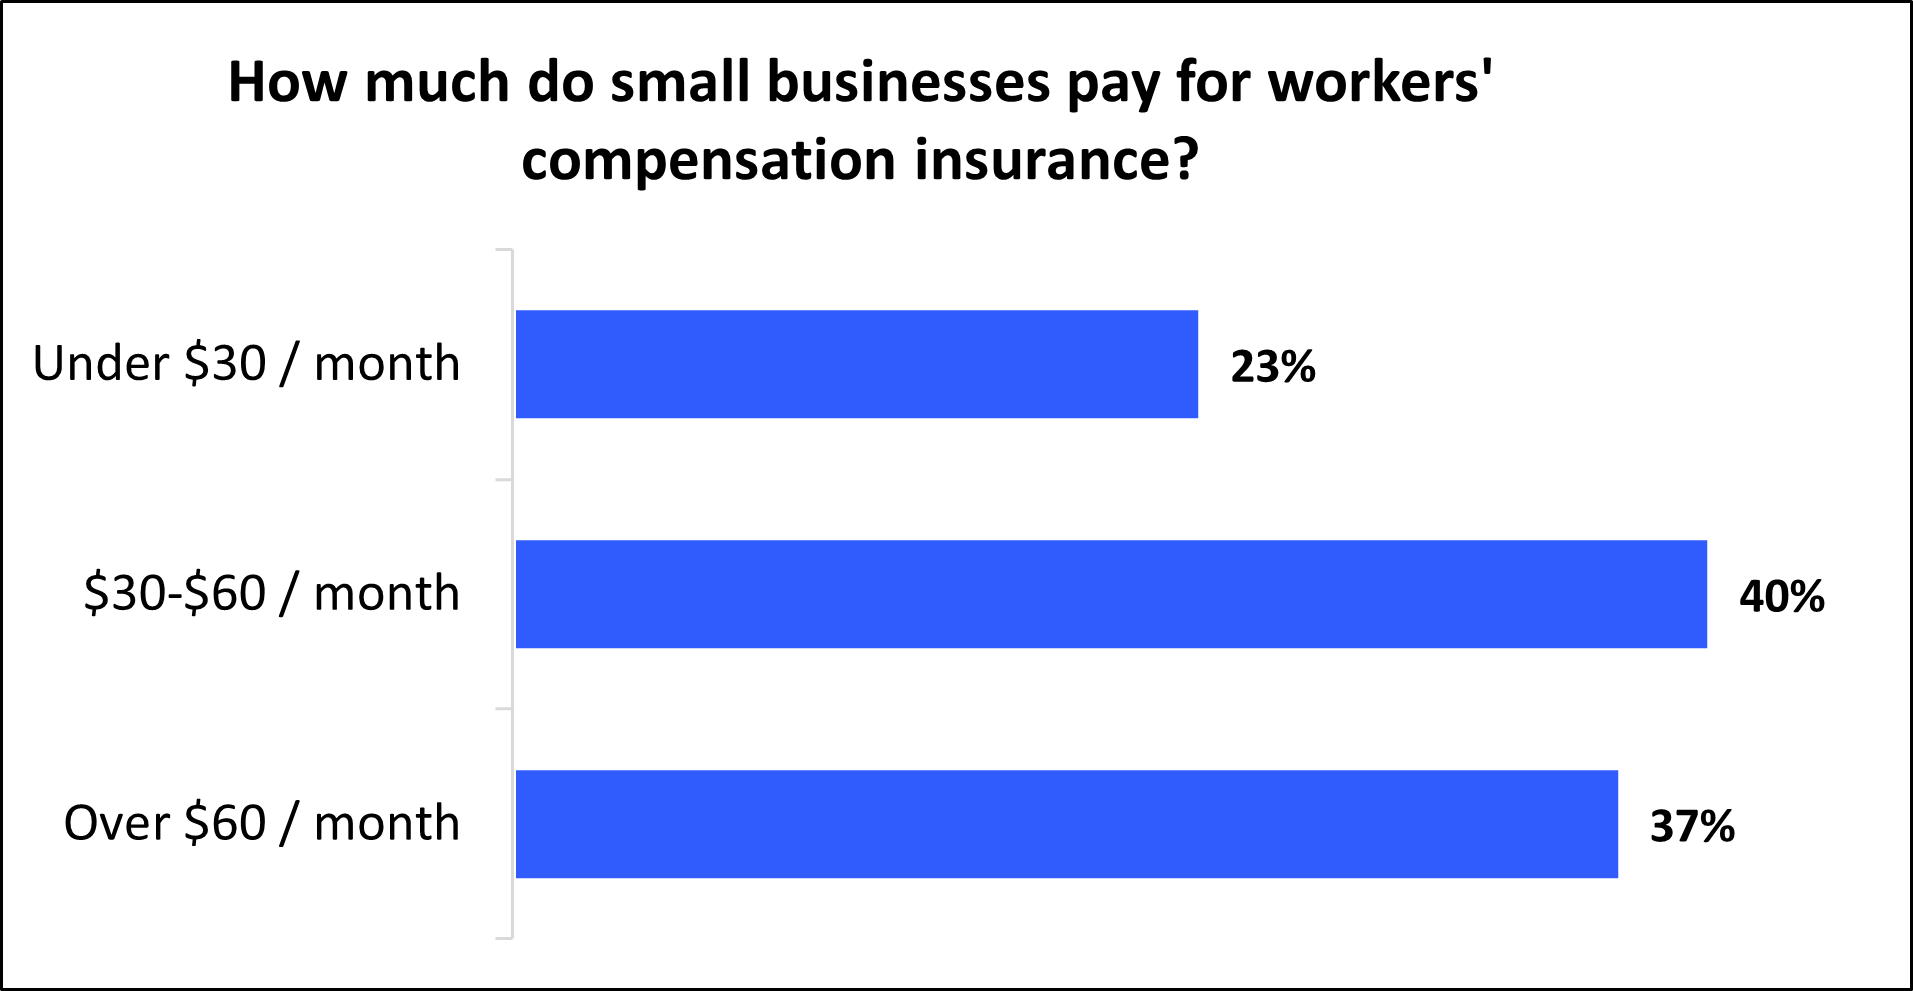 How much do small businesses pay for workers' compensation insurance?